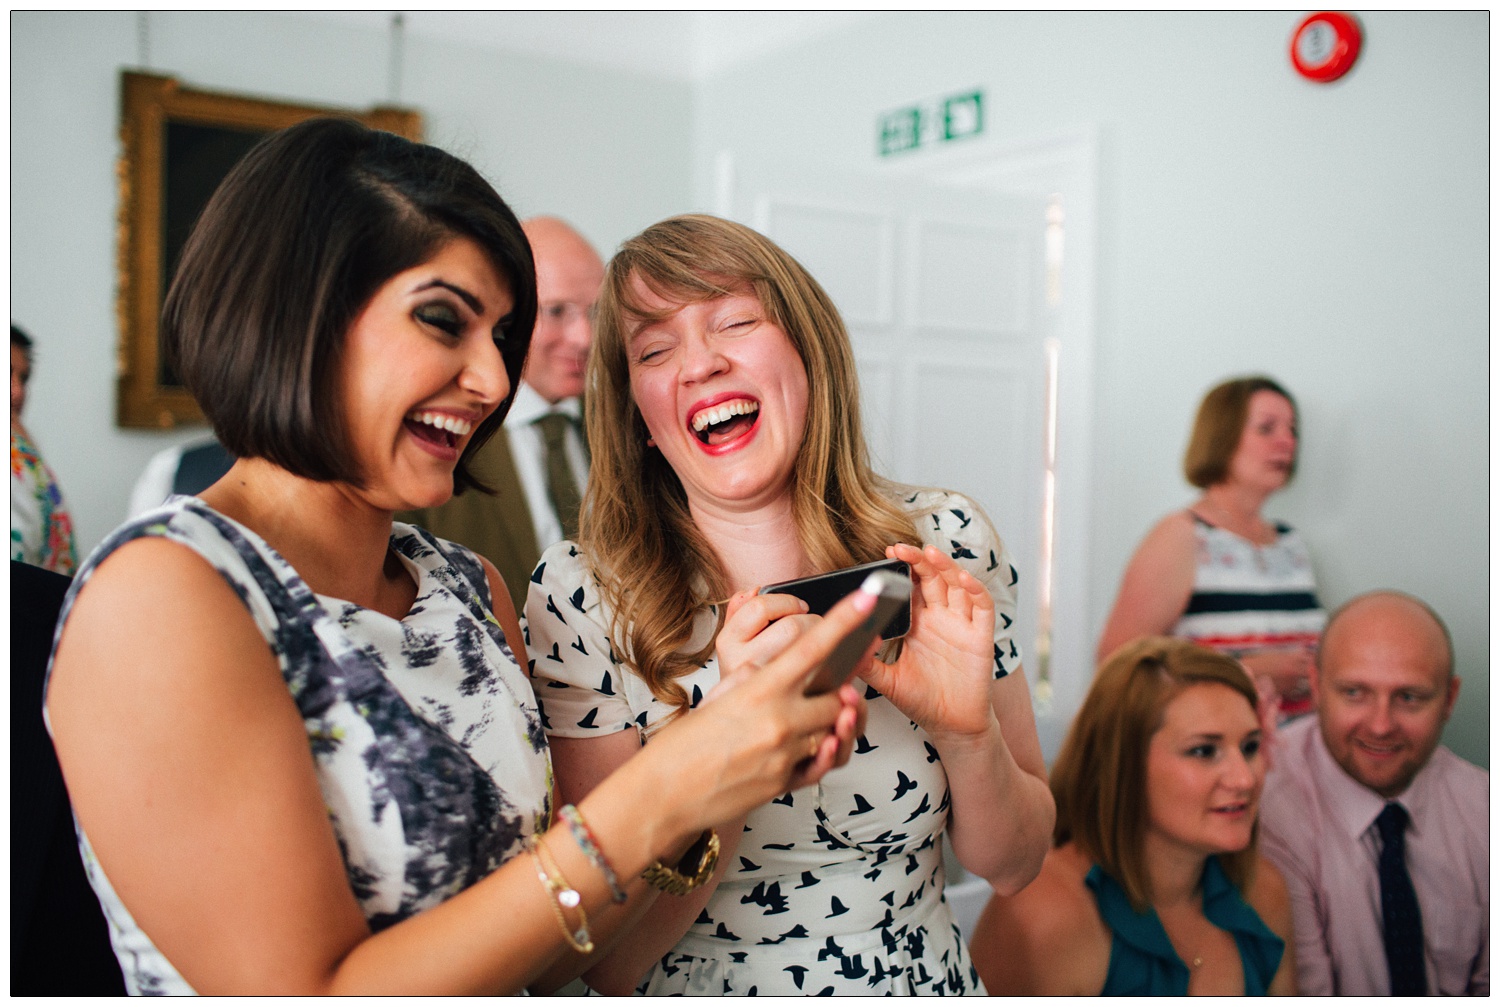 Two women laughing at their phones in the wedding ceremony room at Tenterden town hall.